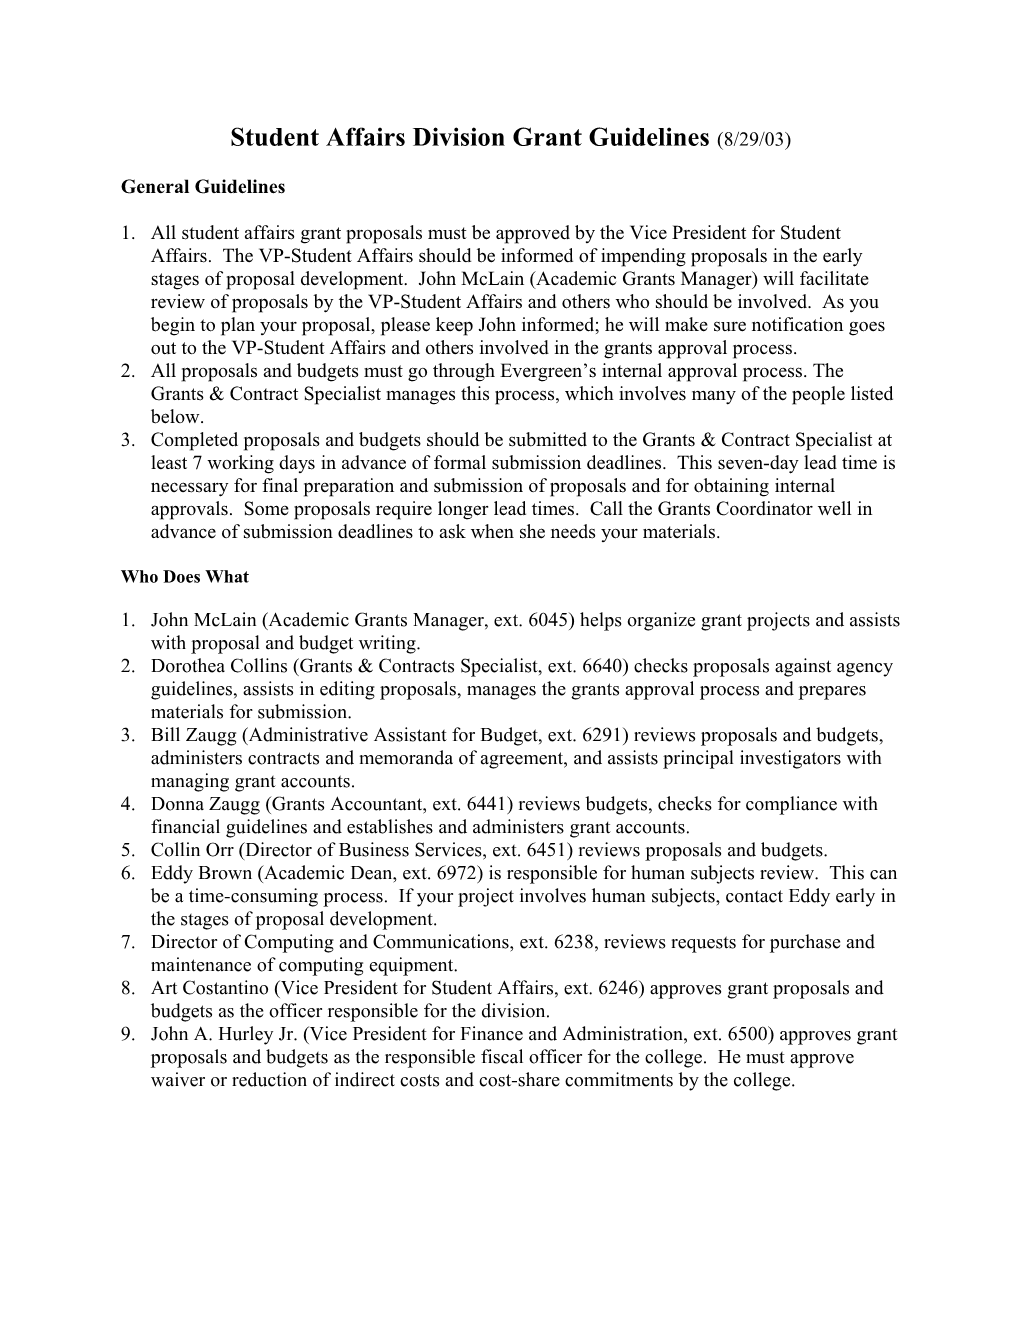 Student Affairs Division Grant Guidelines (4/15/02)